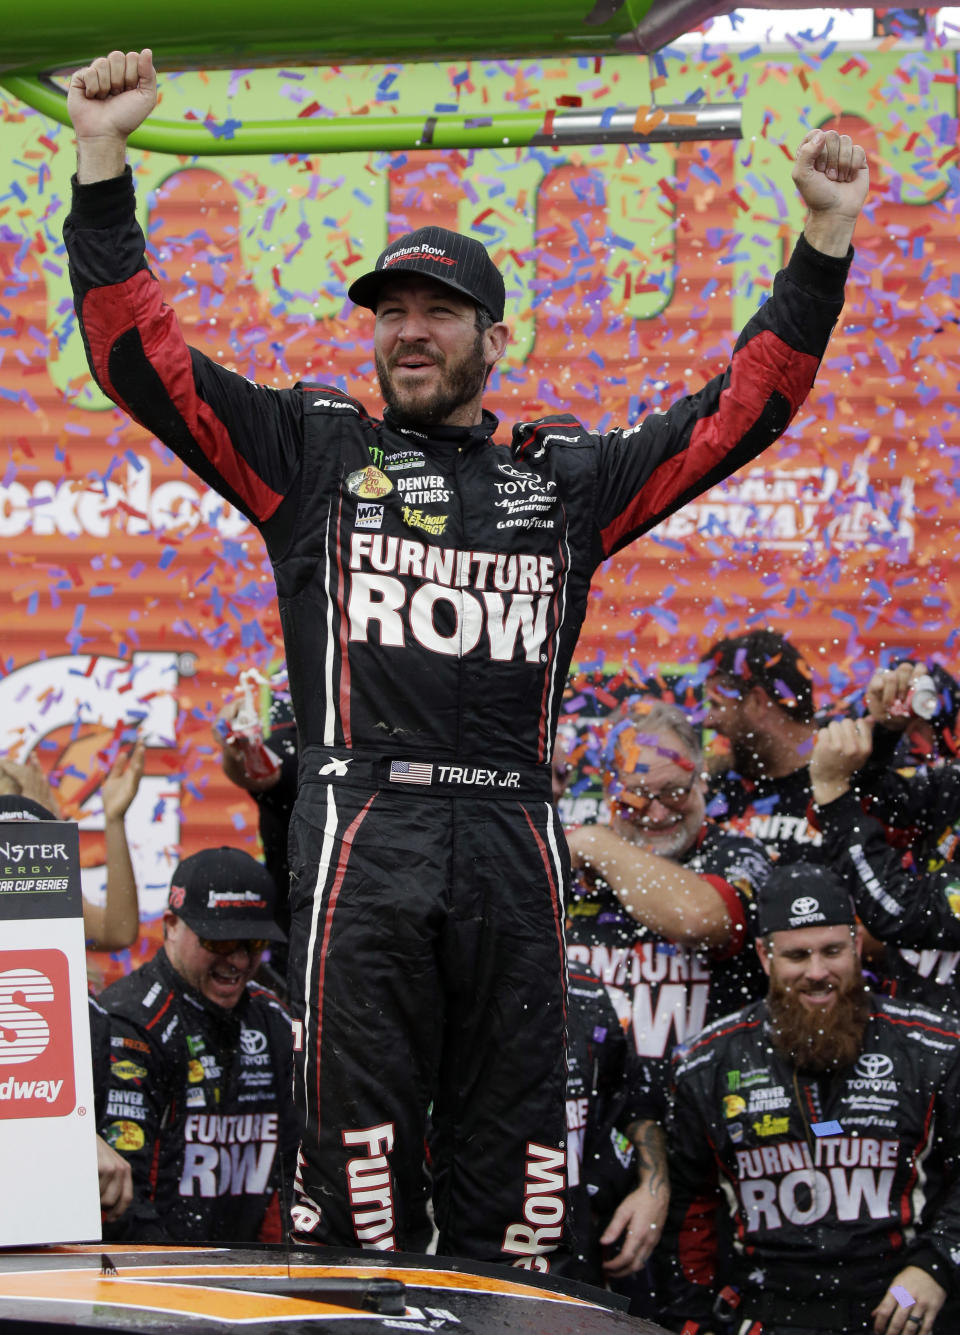 FILE - In this Sept. 17, 2017, file photo, Martin Truex Jr. celebrates with his crew in Victory Lane after winning a NASCAR Cup Monster Energy Series auto race at Chicagoland Speedway in Joliet, Ill. Furniture Row Racing will cease operations at the end of this season, shutting its doors one year after Martin Truex Jr. won NASCAR’s championship driving for the maverick race team. Furniture Row is an anomaly in NASCAR in that it is a single-car team based in Denver, Colorado, far removed from the North Carolina hub. Team owner Barney Visser was a racing enthusiast with a vision when he launched the team in 2005 determined to do it his own way. But a lack of sponsorship for next season led Visser to make the “painful decision” to close the team. (AP Photo/Nam Y. Huh, File)